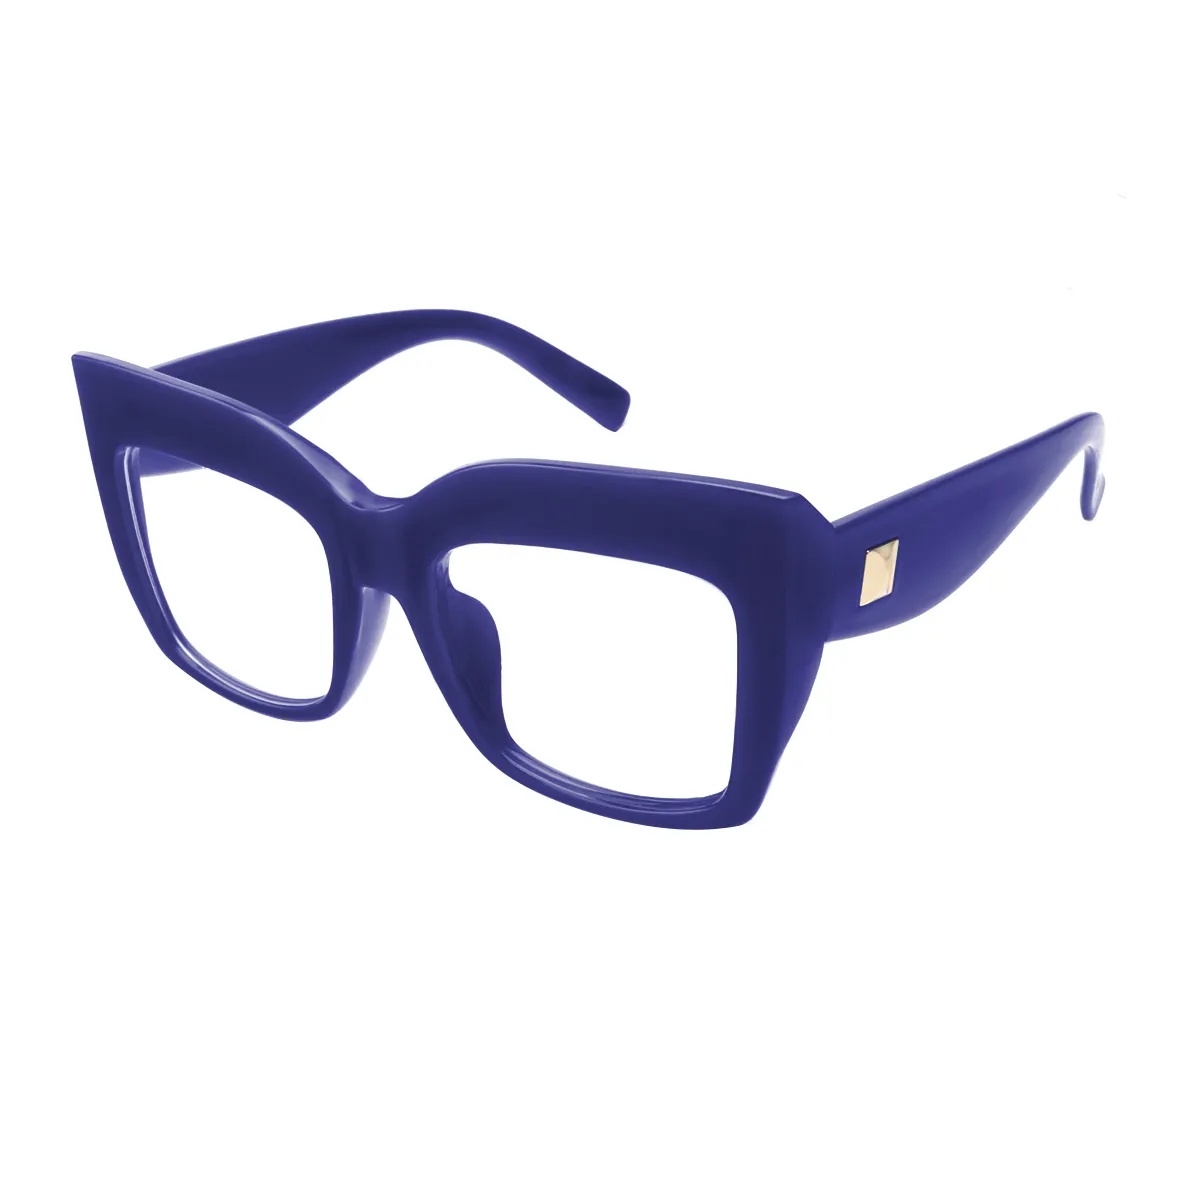 Gayle - Square Blue Glasses for Women